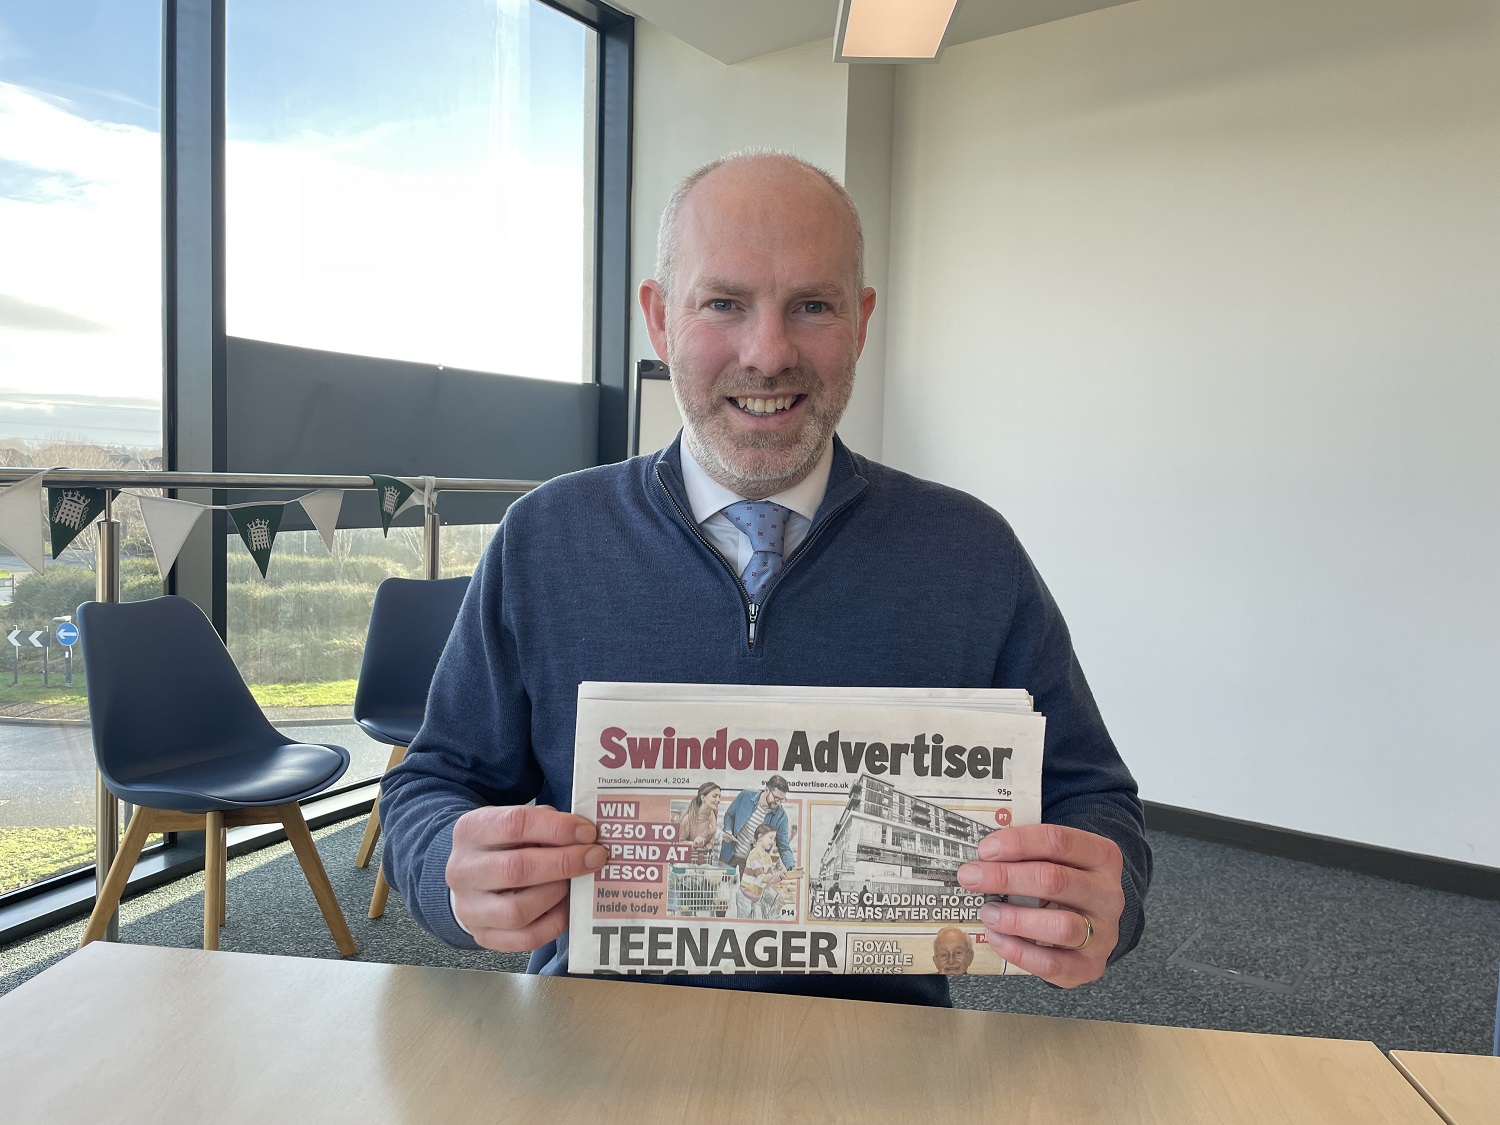 Swindon Advertiser Column - We Have Built A Tough And Fair Immigration System